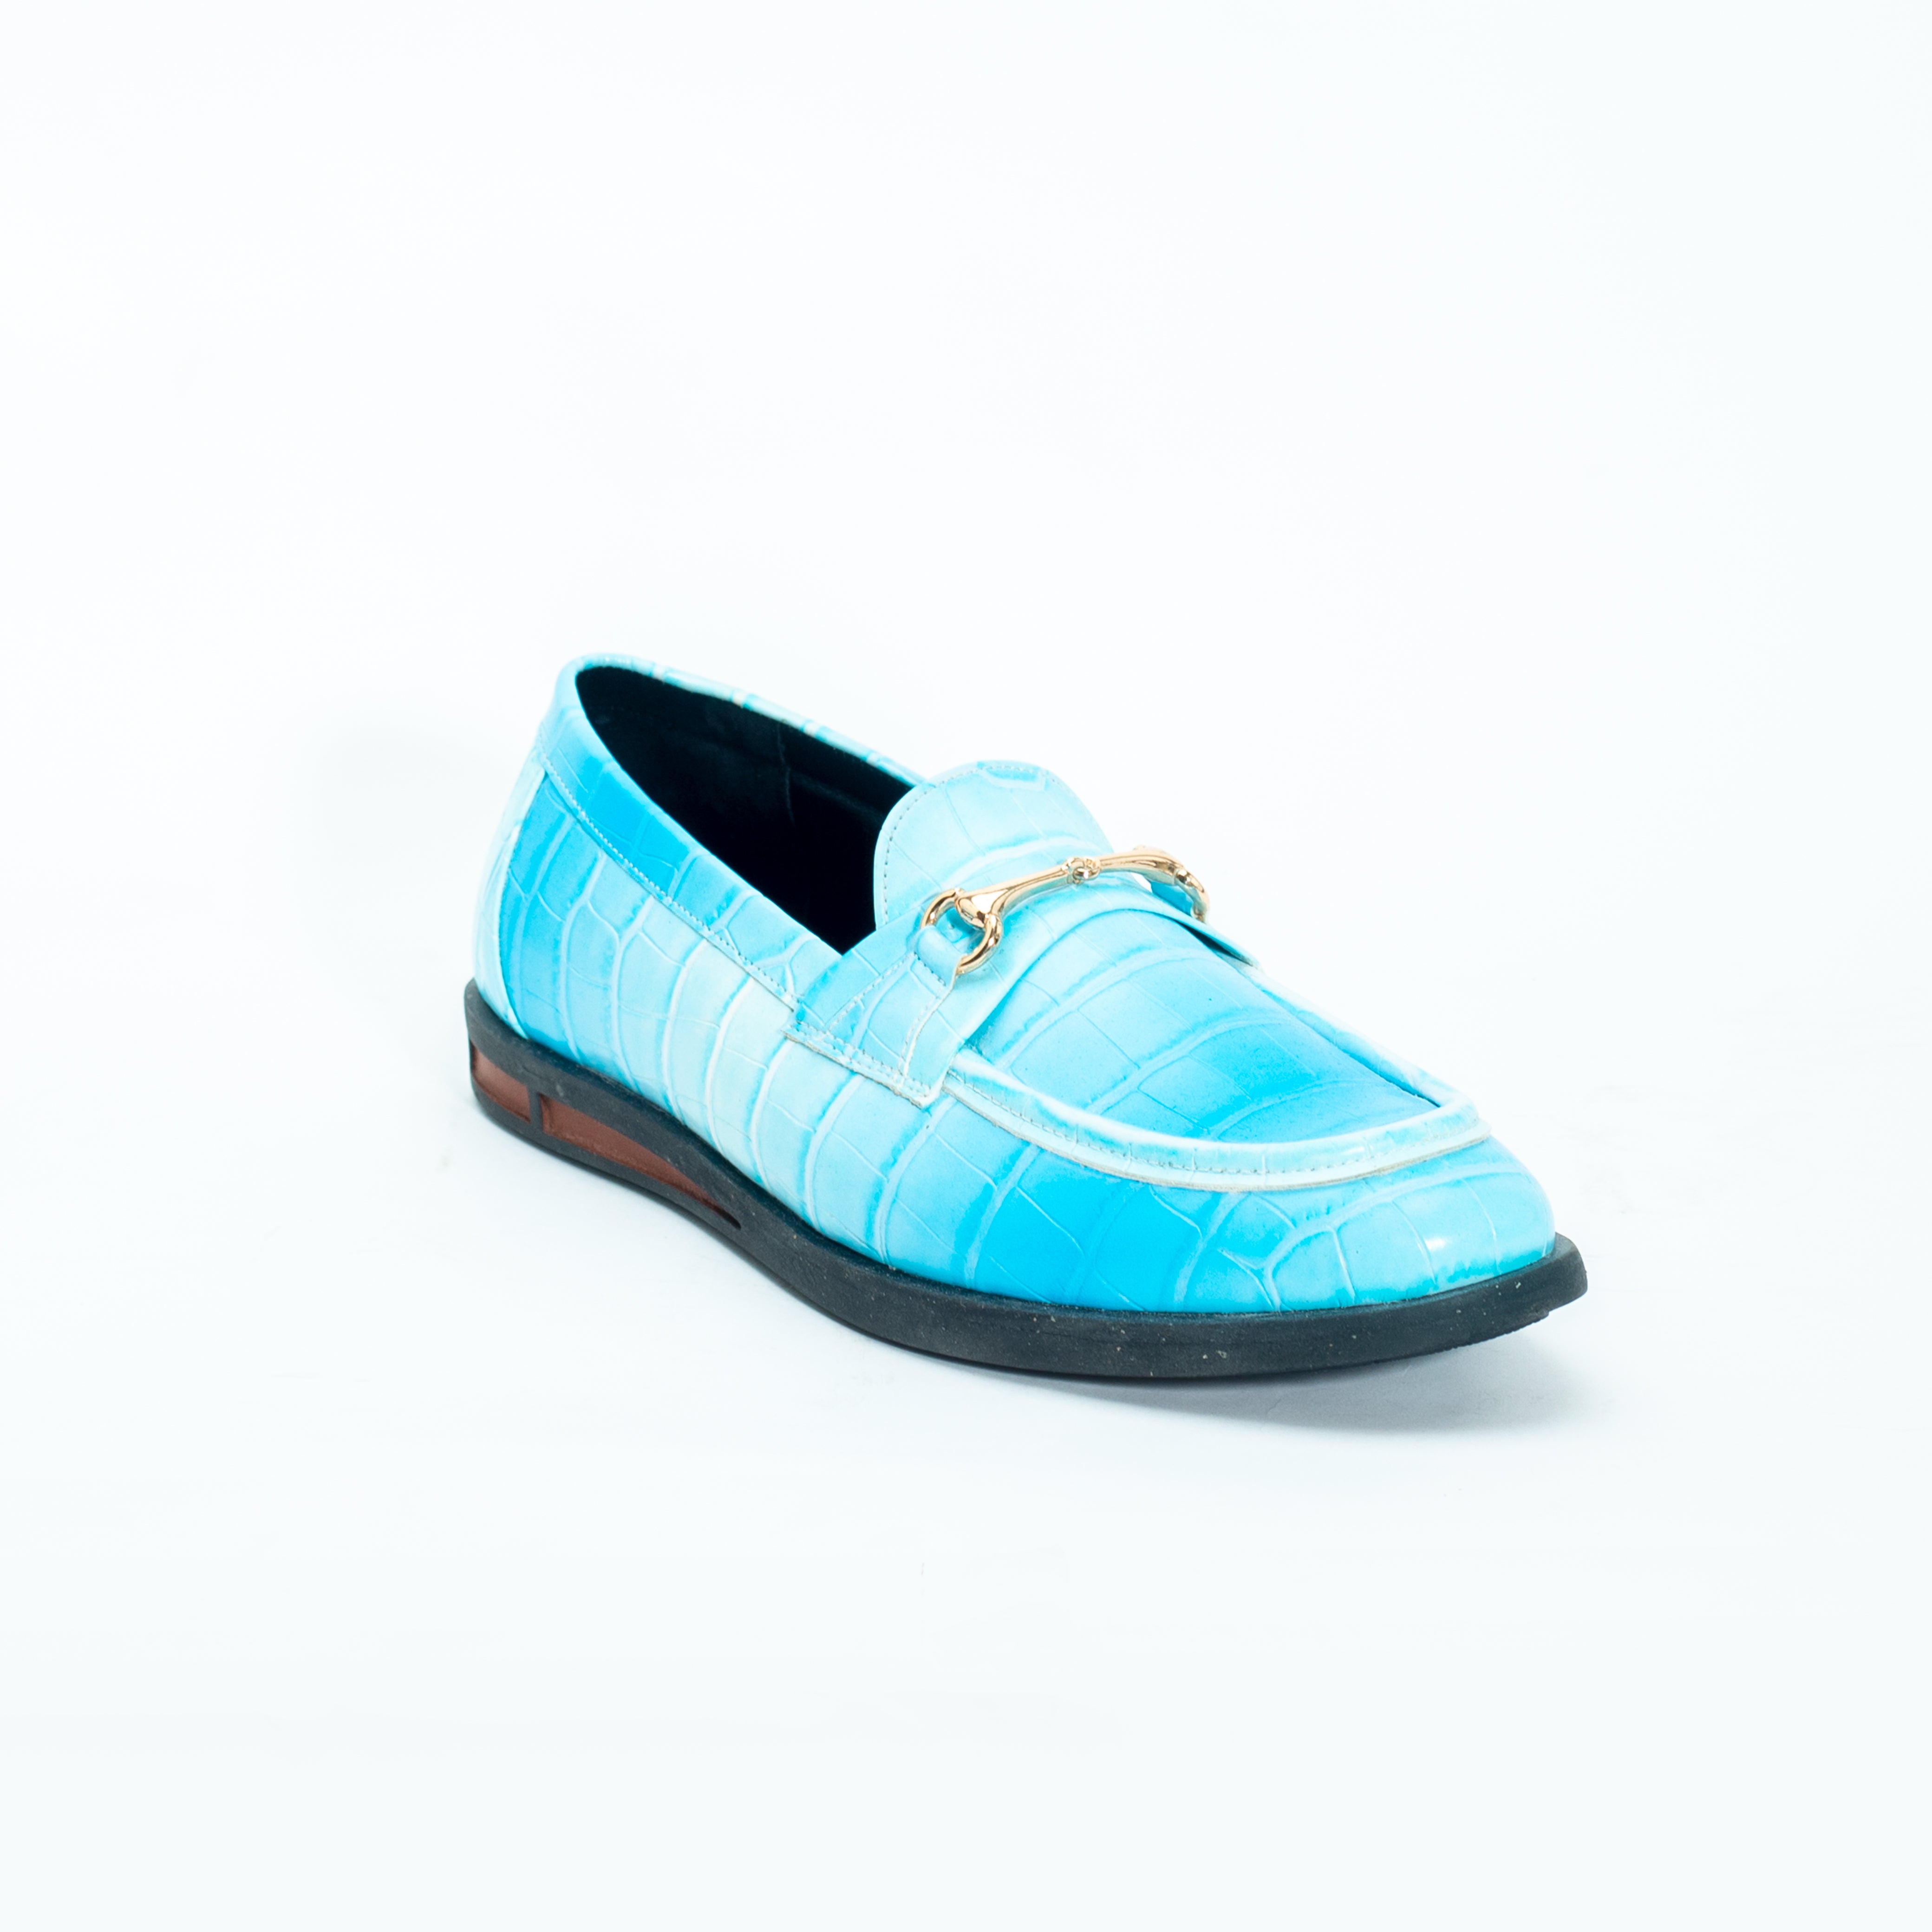 A pair of vibrant Monkstory brand Flatform Horsebit Slip Ons in powder blue crocodile skin, perfect for formal occasions.